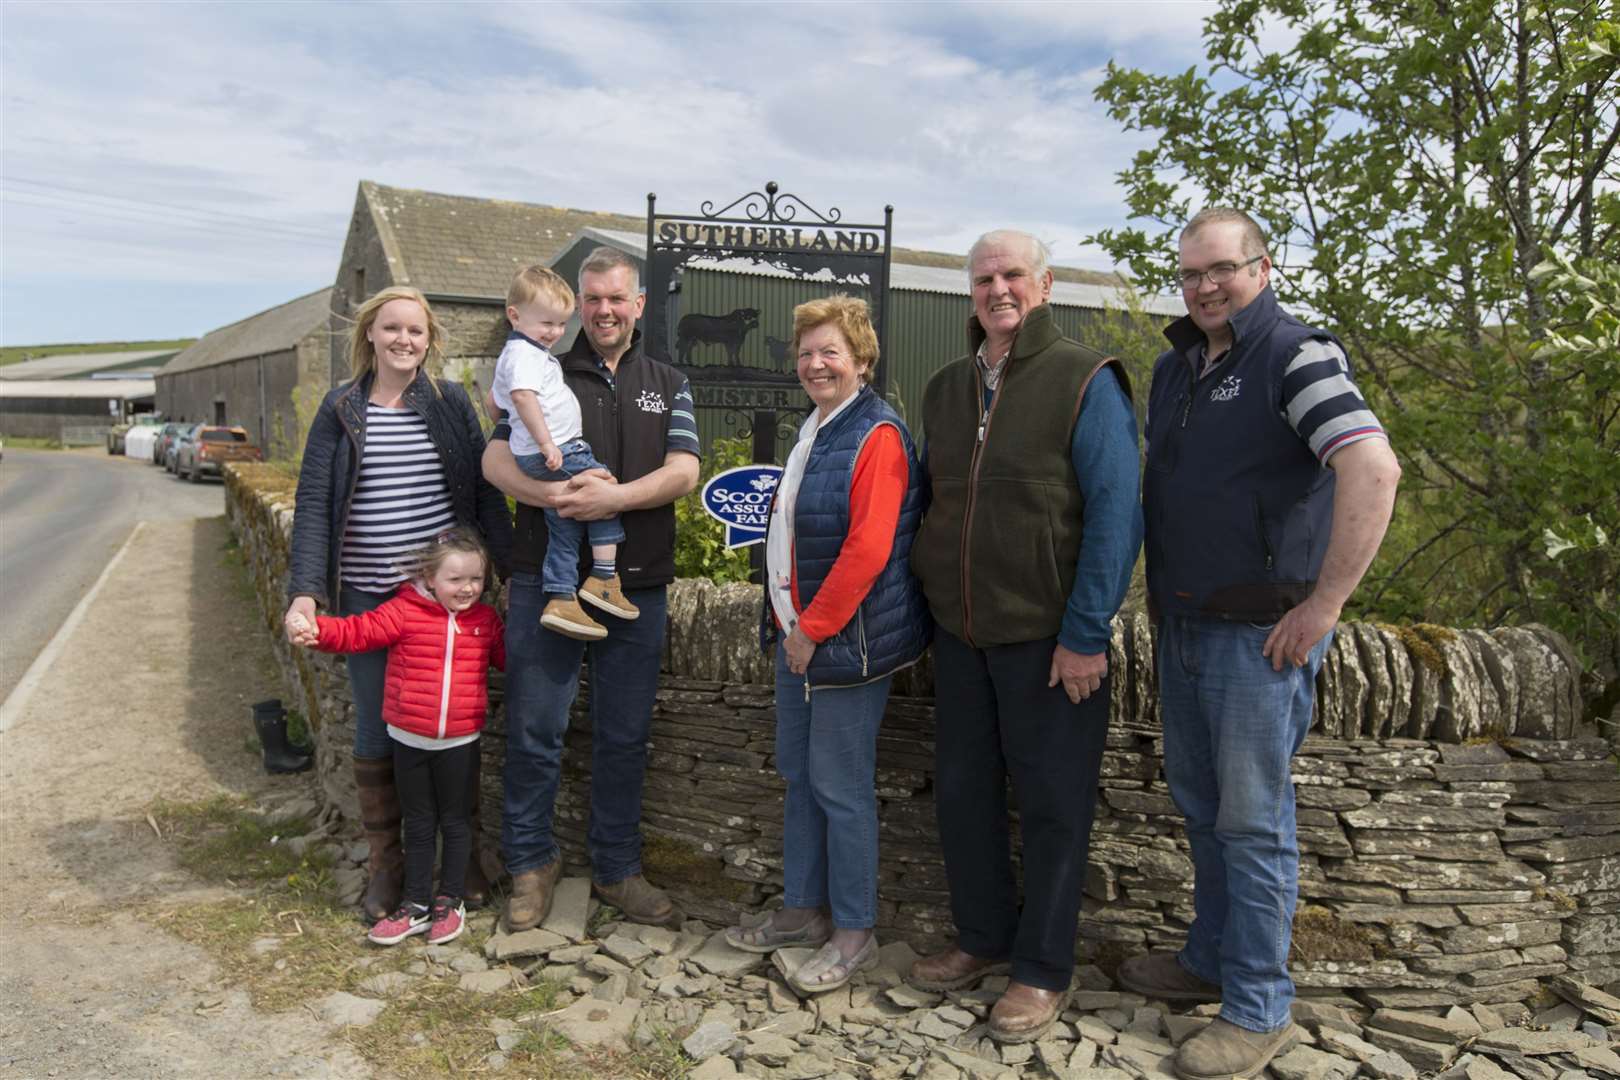 The Sutherland family, Kenneth and Elspeth, with son Stephen (right) and son Kenneth jnr along with his wife Fiona, son Jack and daughter Amy. Picture: Robert MacDonald / Northern Studios